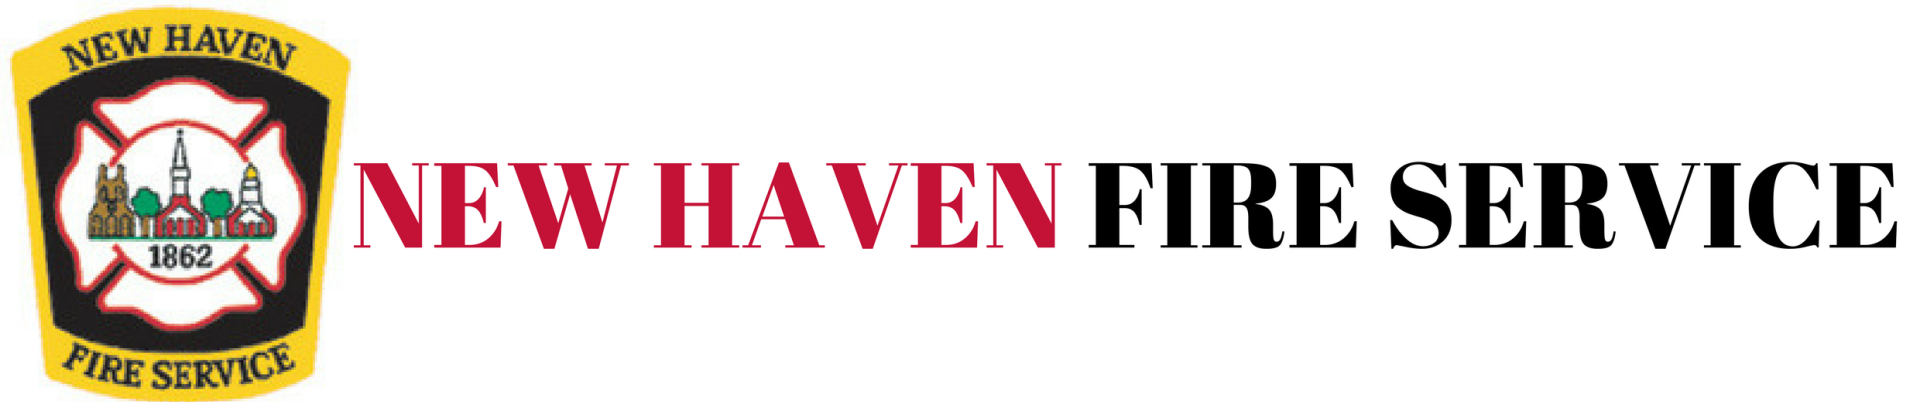 New Haven Fire Department Banner